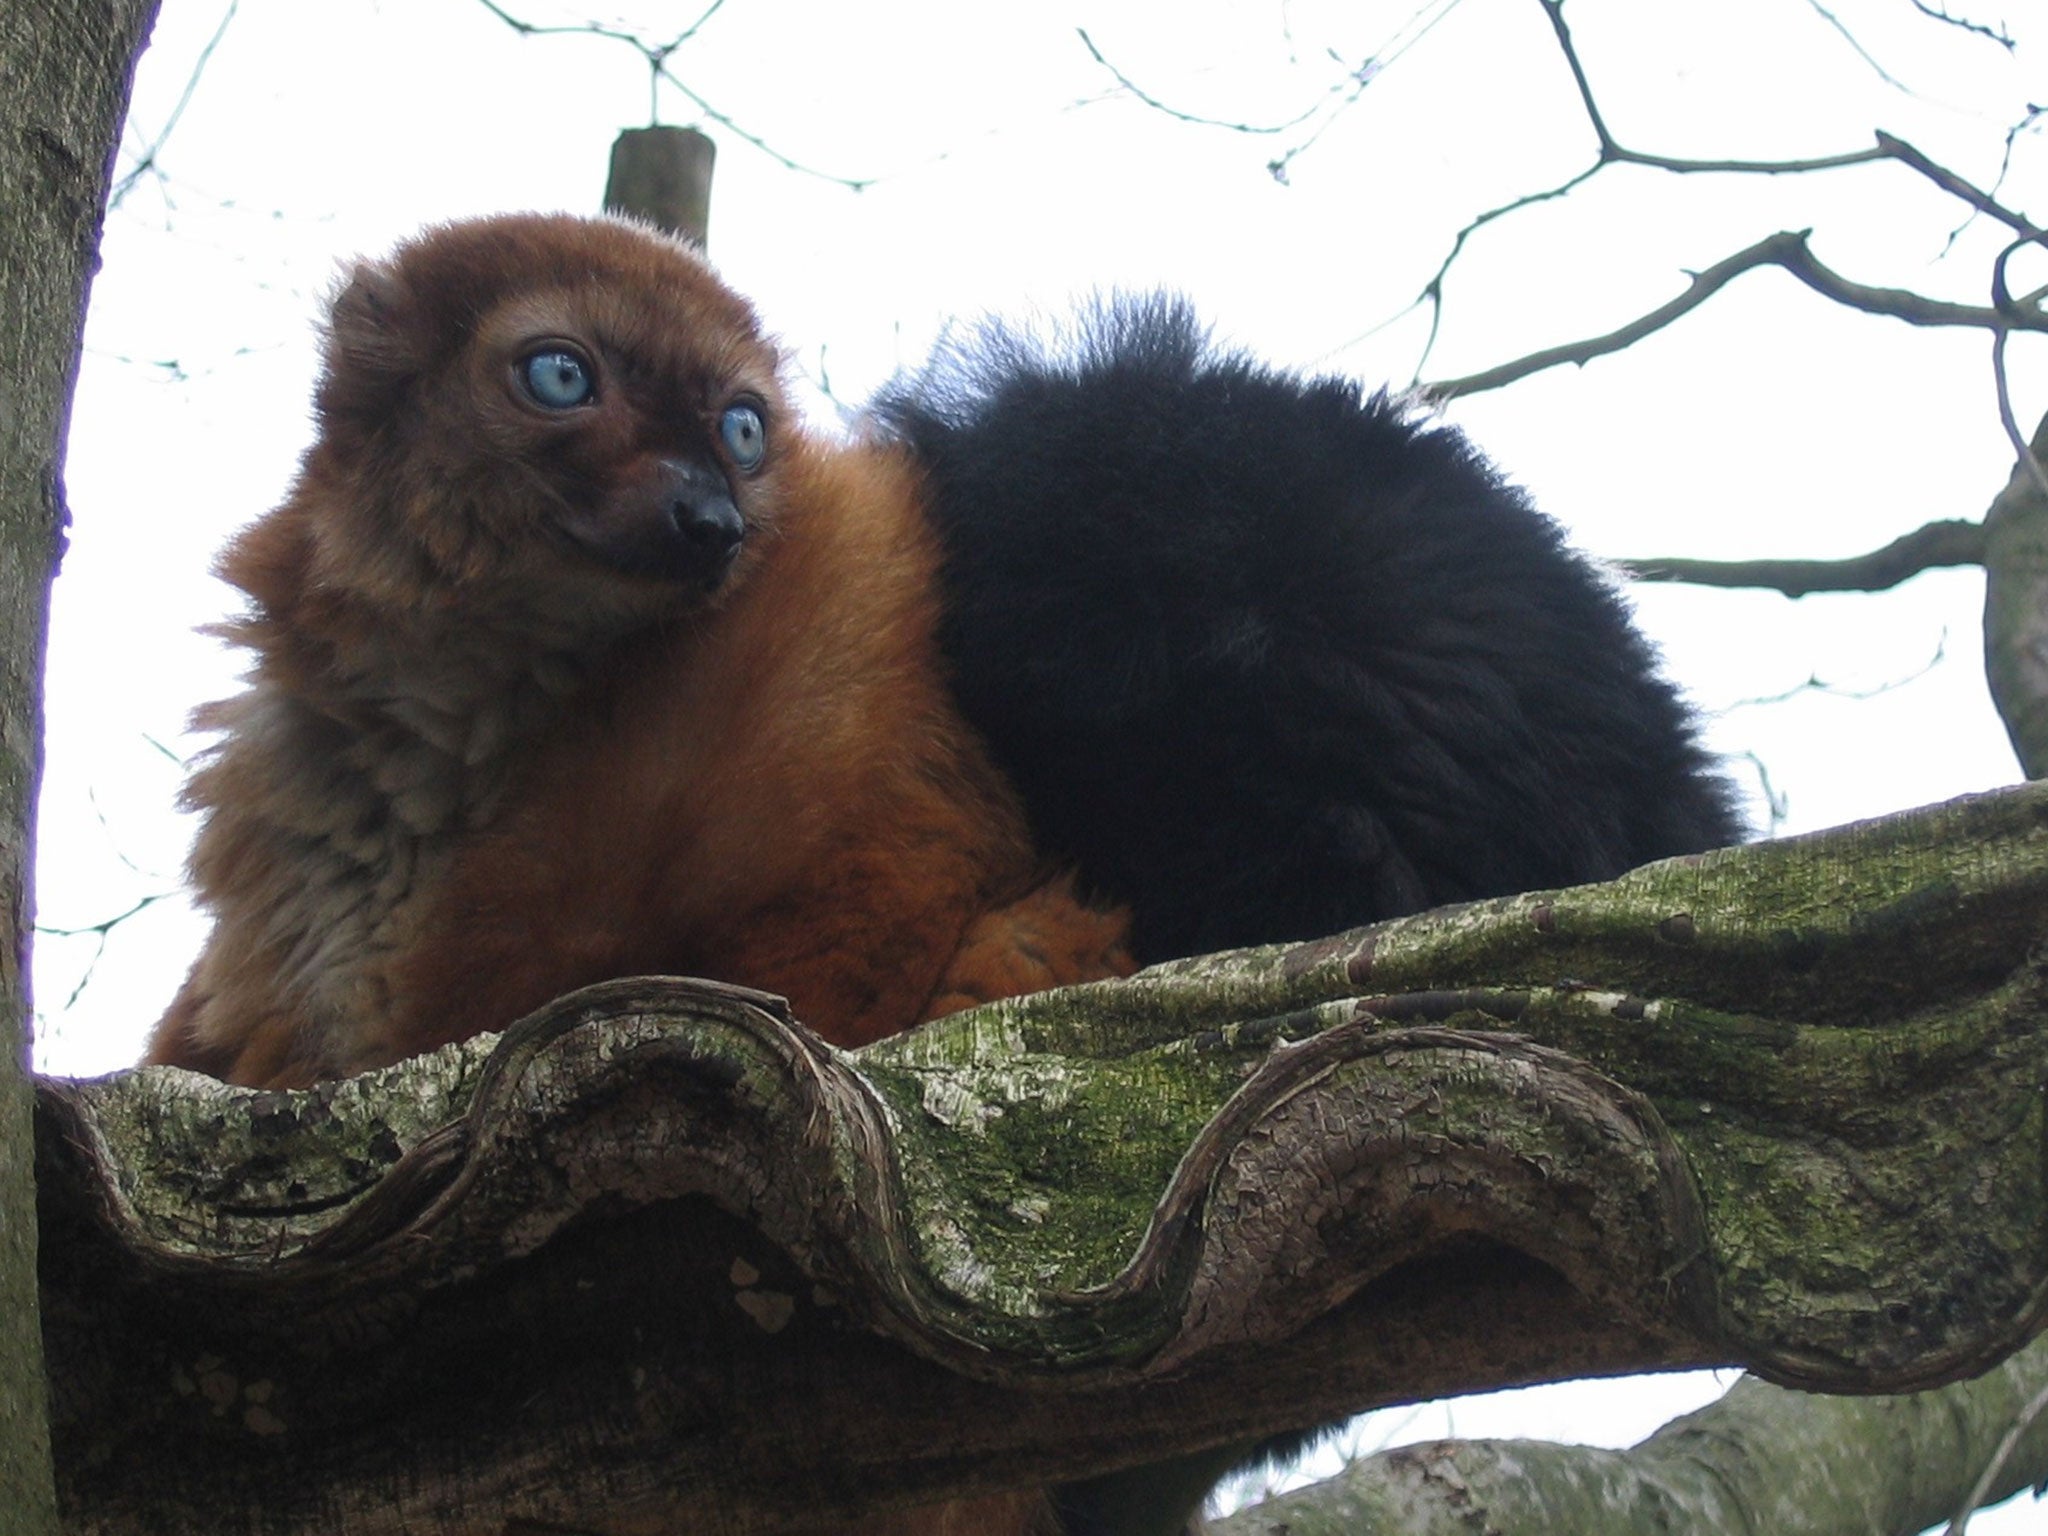 The population of the critically endangered blue-eyed black lemur has been reduced to a few thousand